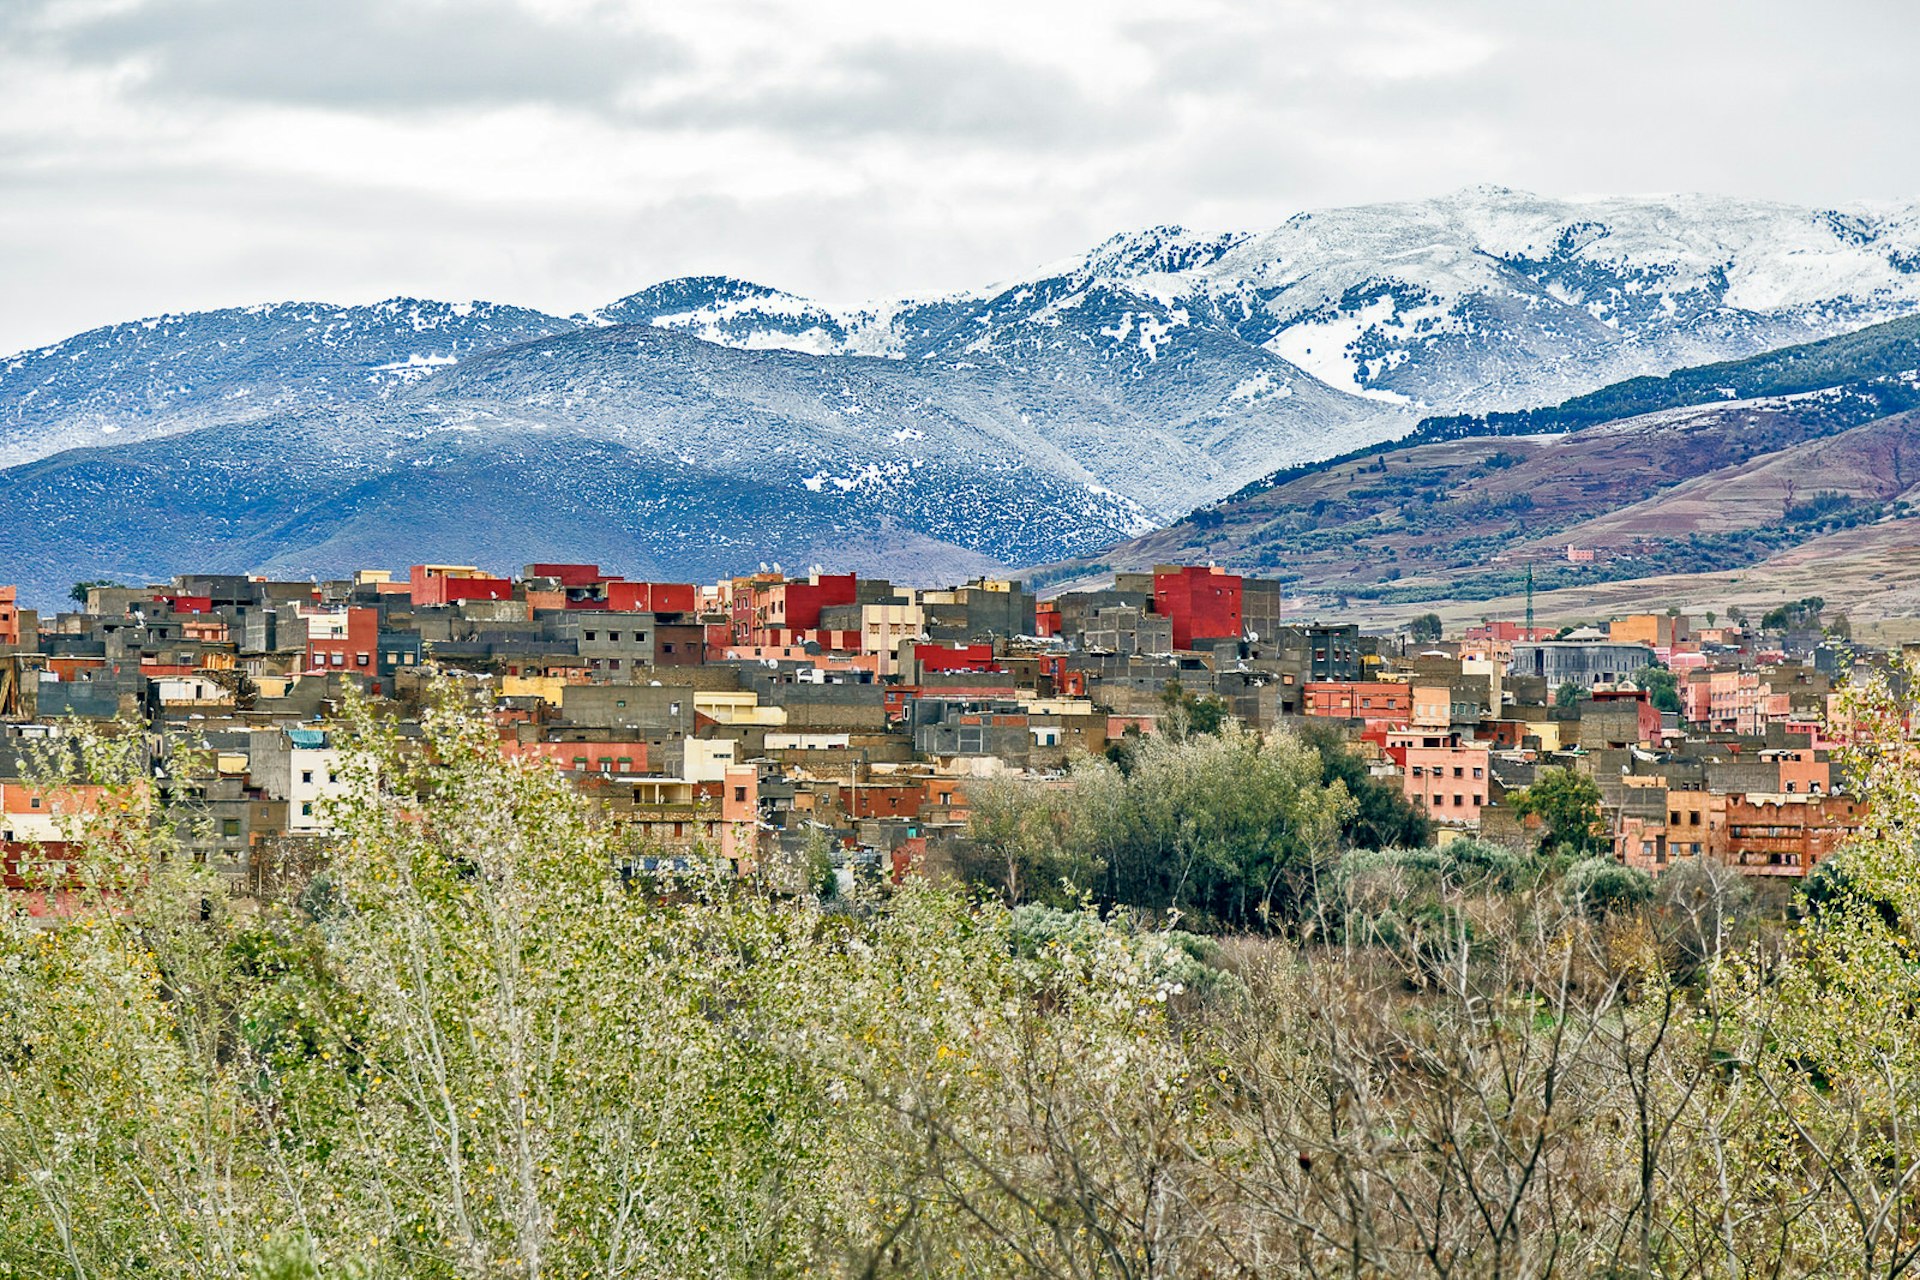 Amizmiz, a small village of atlas in Marrakesh, Morocco. Yellow and terracotta coloured square buildings sit behind green leafy trees. The snow-capped Atlas mountains are in the background, beneath a cloudy, grey sky. 